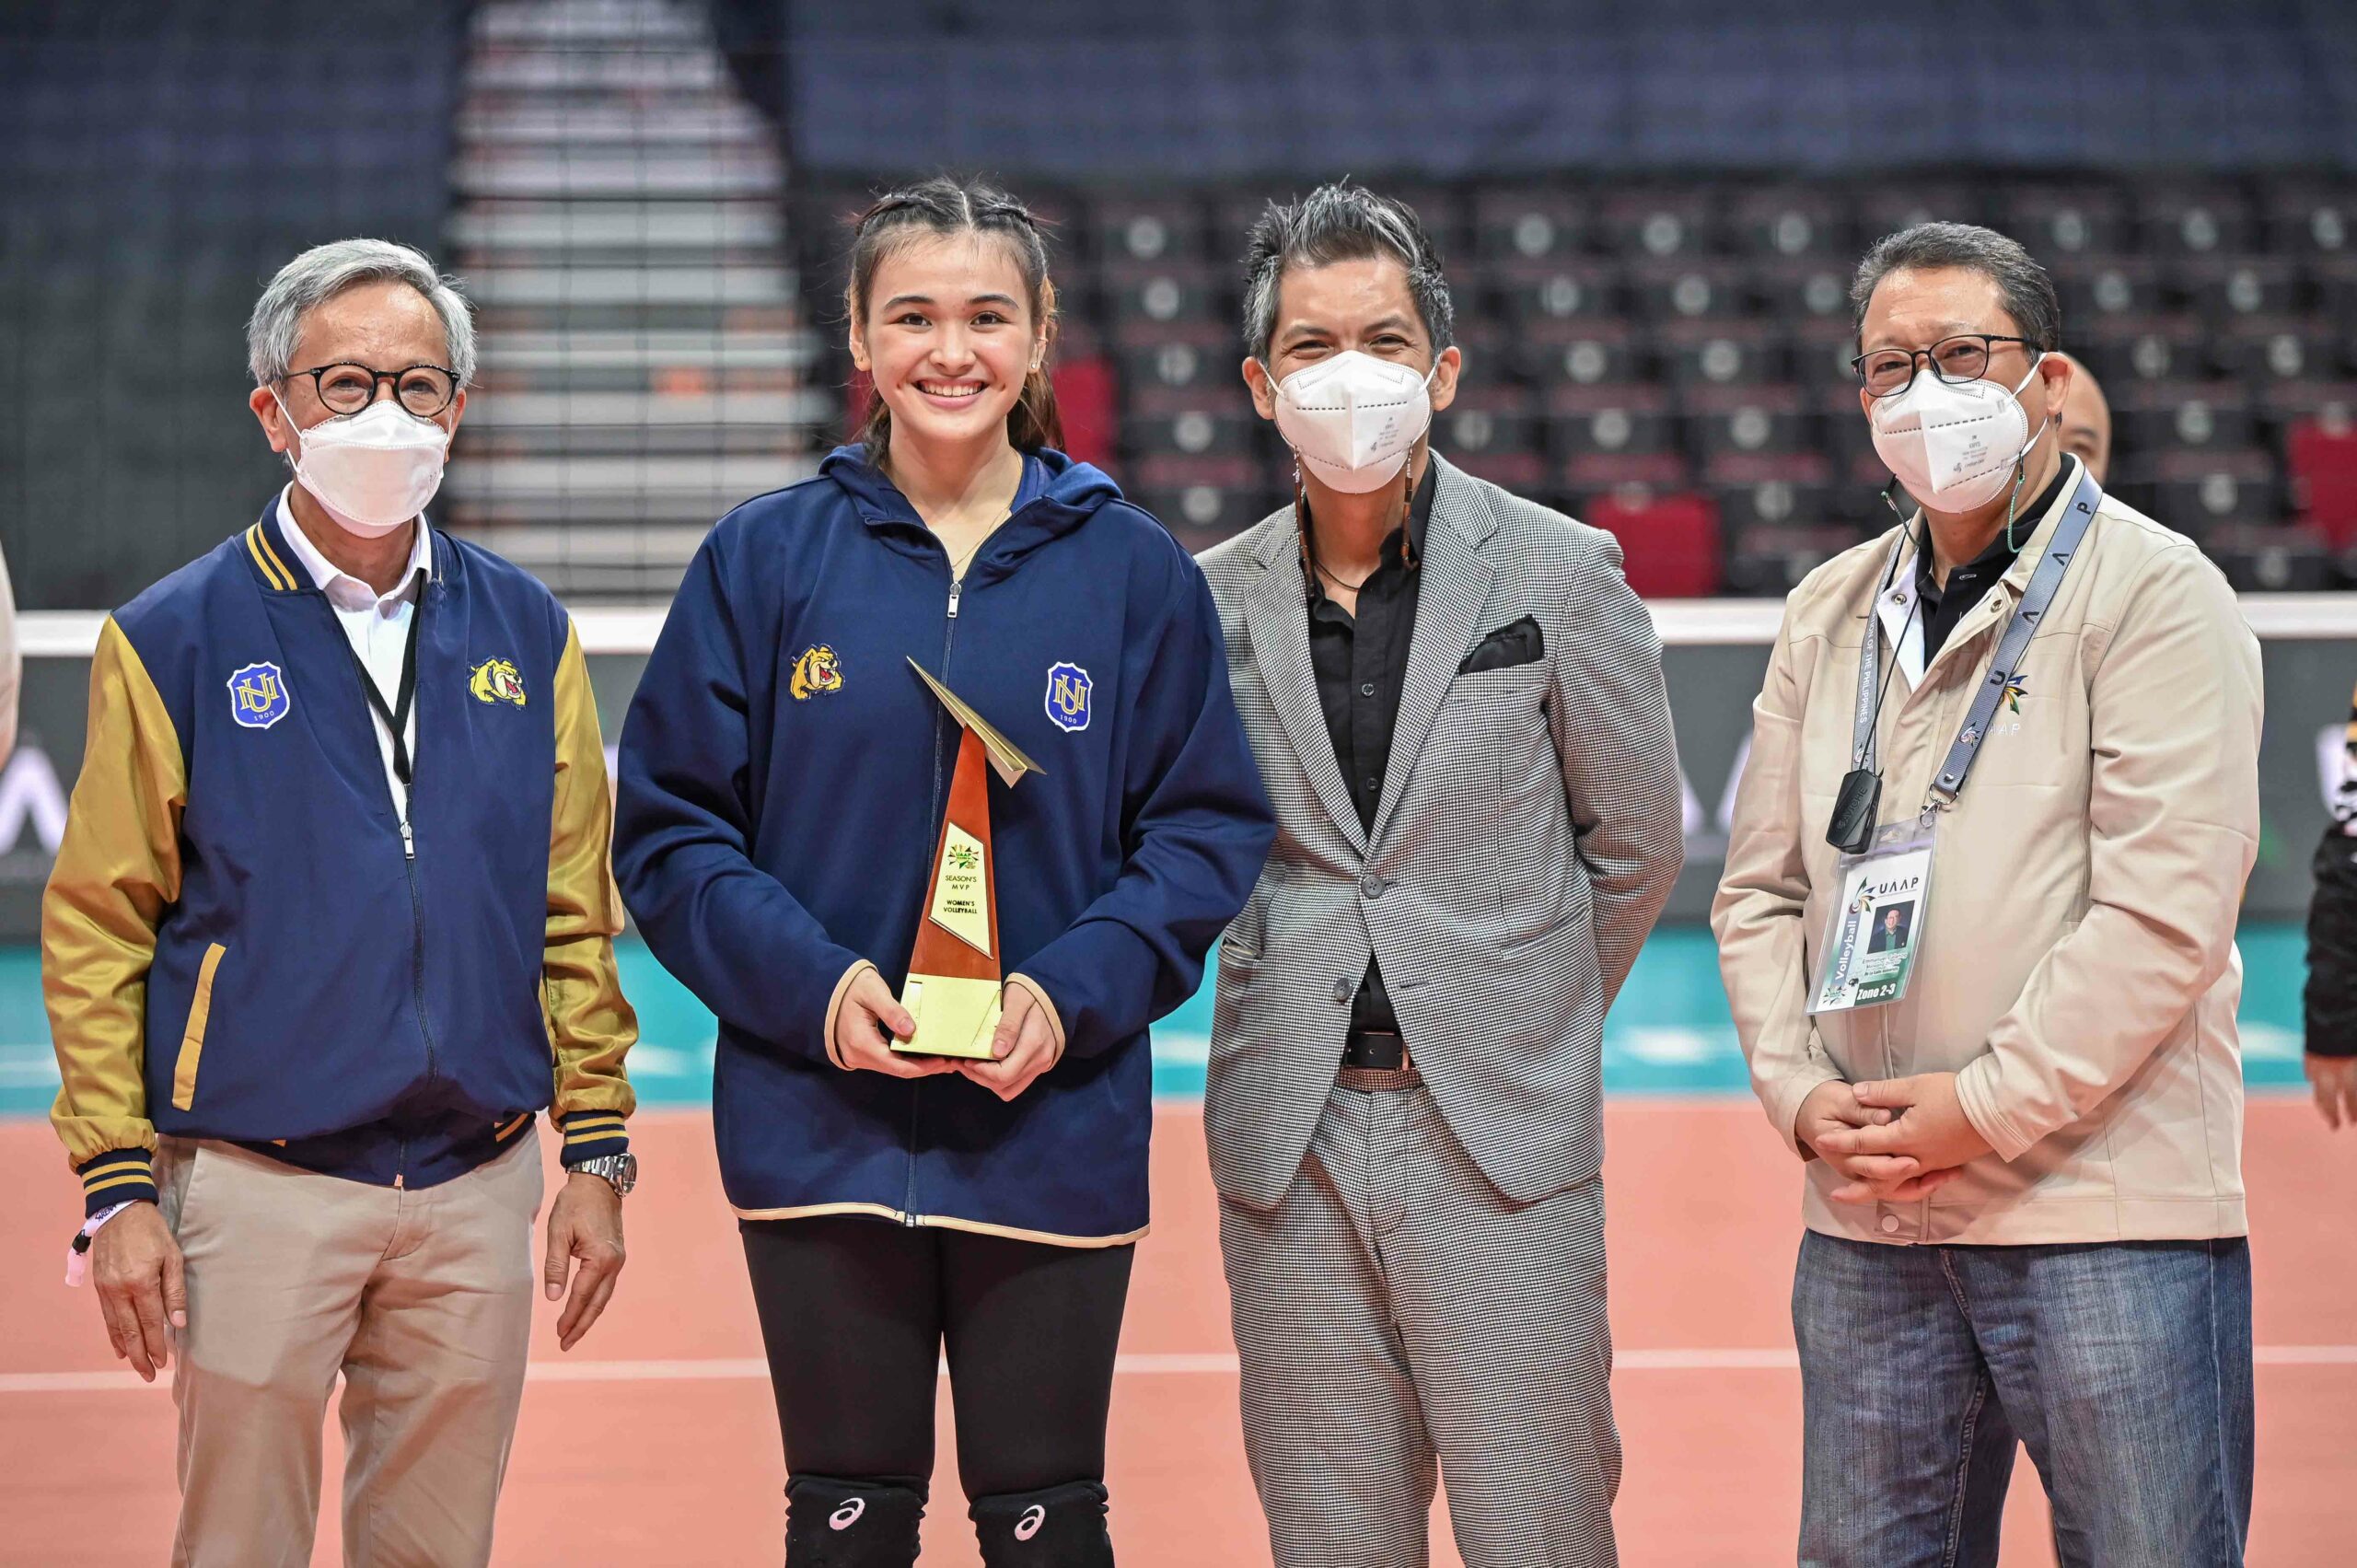 UAAP-Season-84-Womens-Volleyball-Awarding-MVP-NU-Mhicaela-Belen-1-scaled Killer smile takes on new meaning with Rookie MVP Belen News NU UAAP Volleyball  - philippine sports news